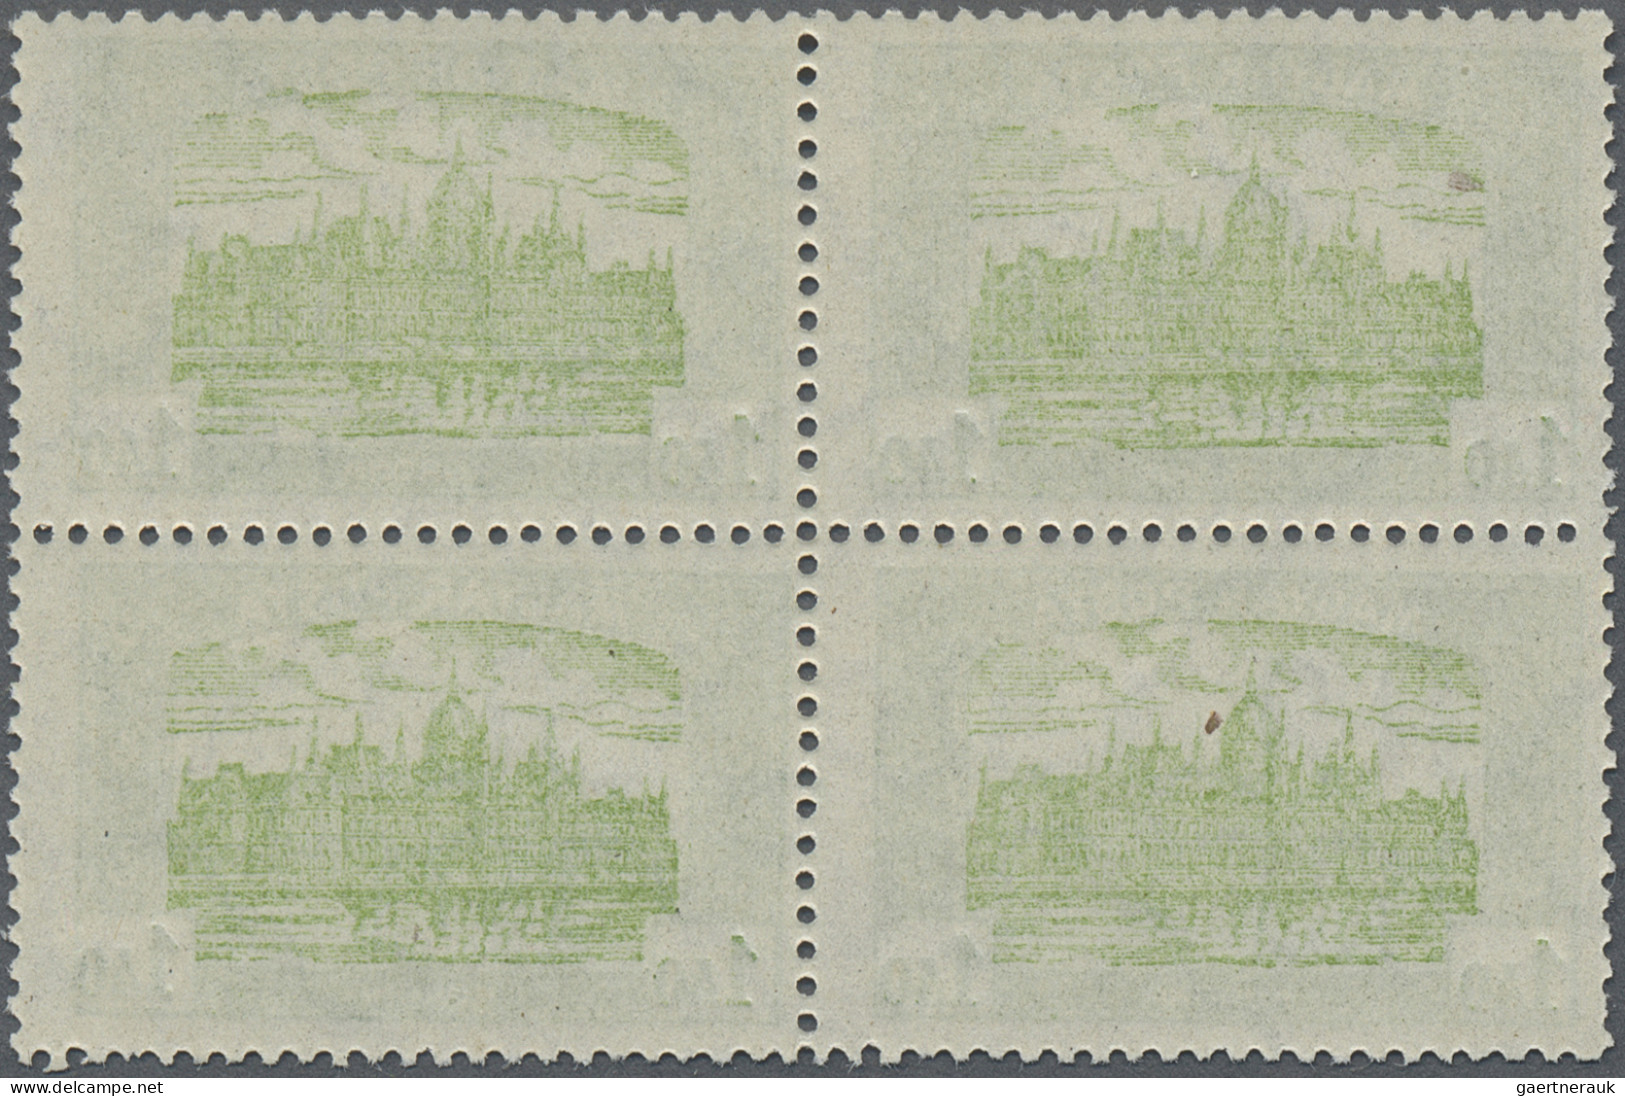 Hungary: 1919, Parliament Building Postage Stamps, 1.40 Kr In Mint Block Of Four - Unused Stamps